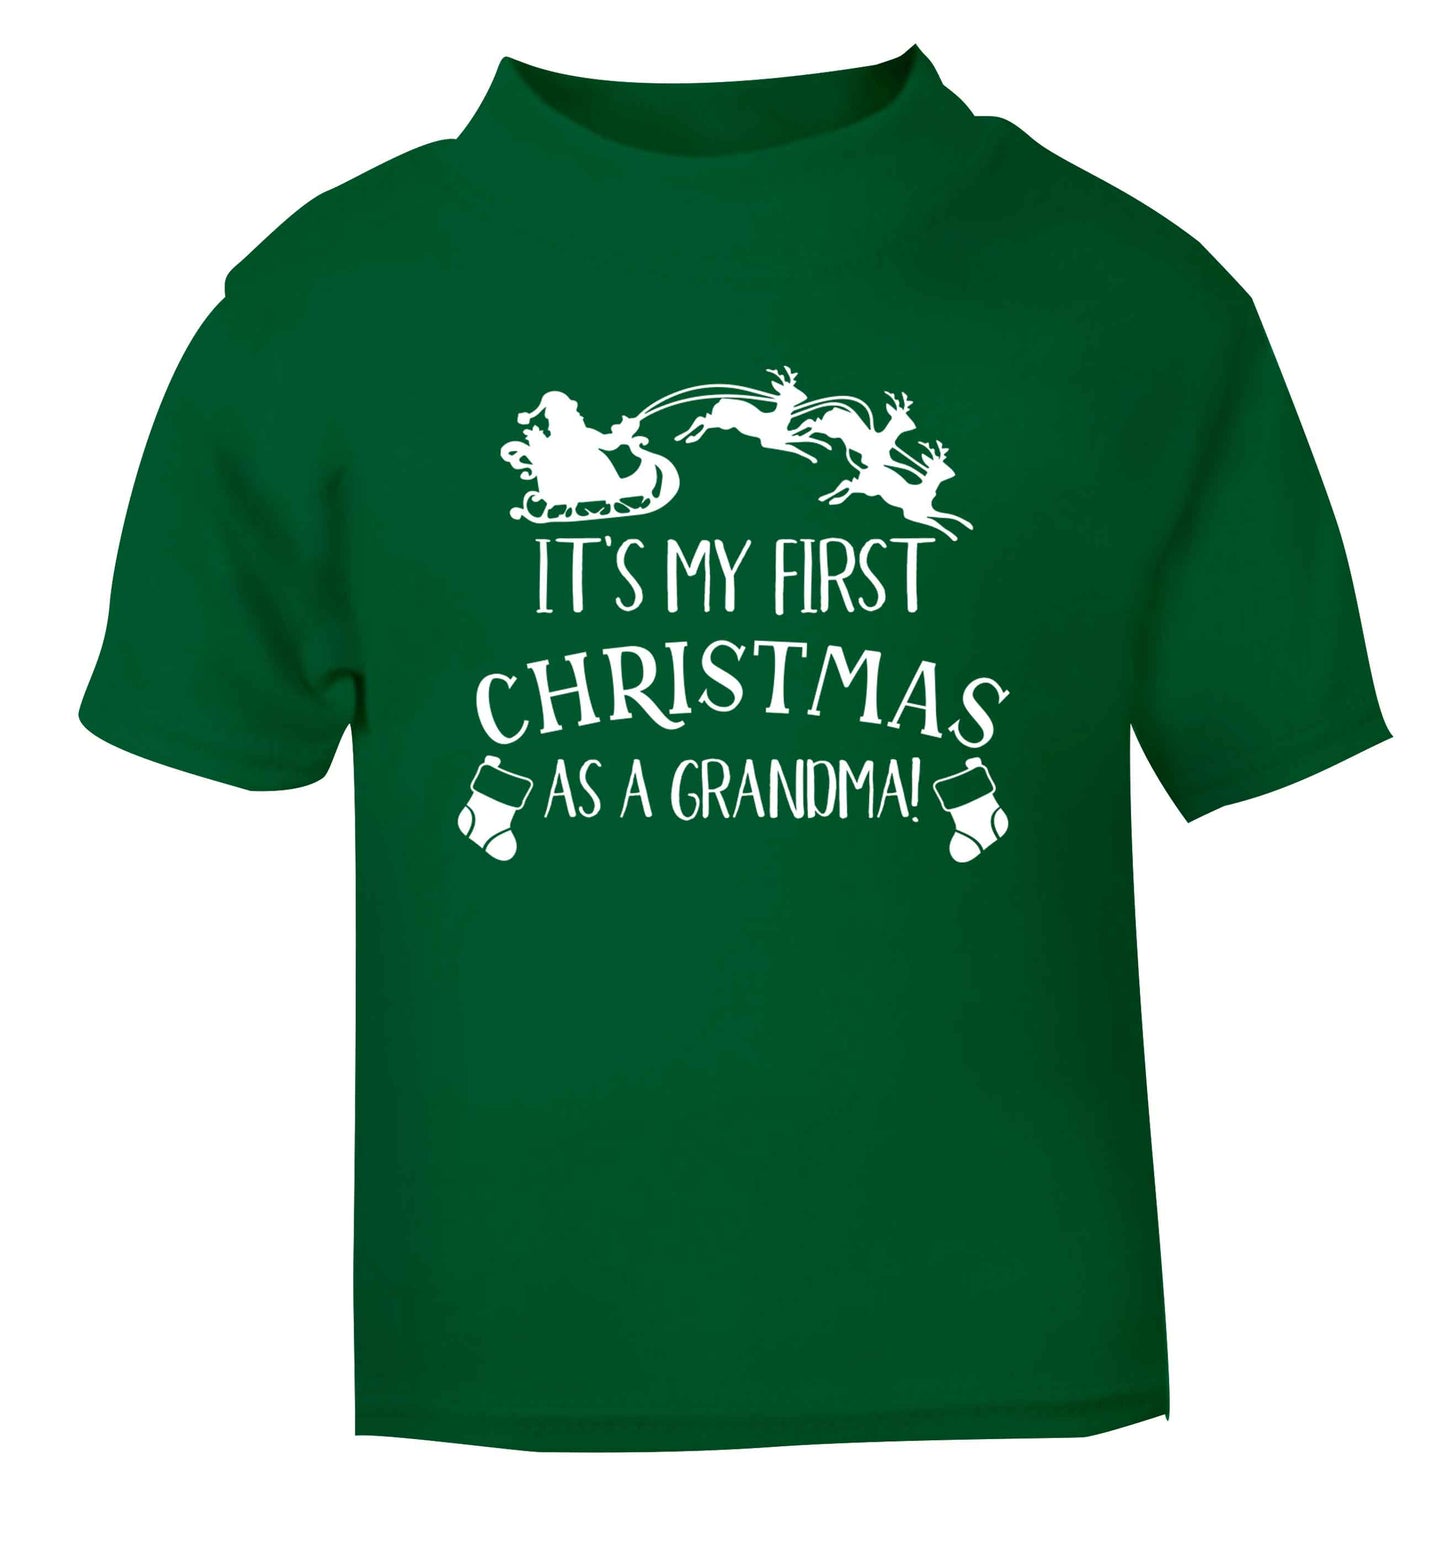 It's my first Christmas as a grandma! green Baby Toddler Tshirt 2 Years